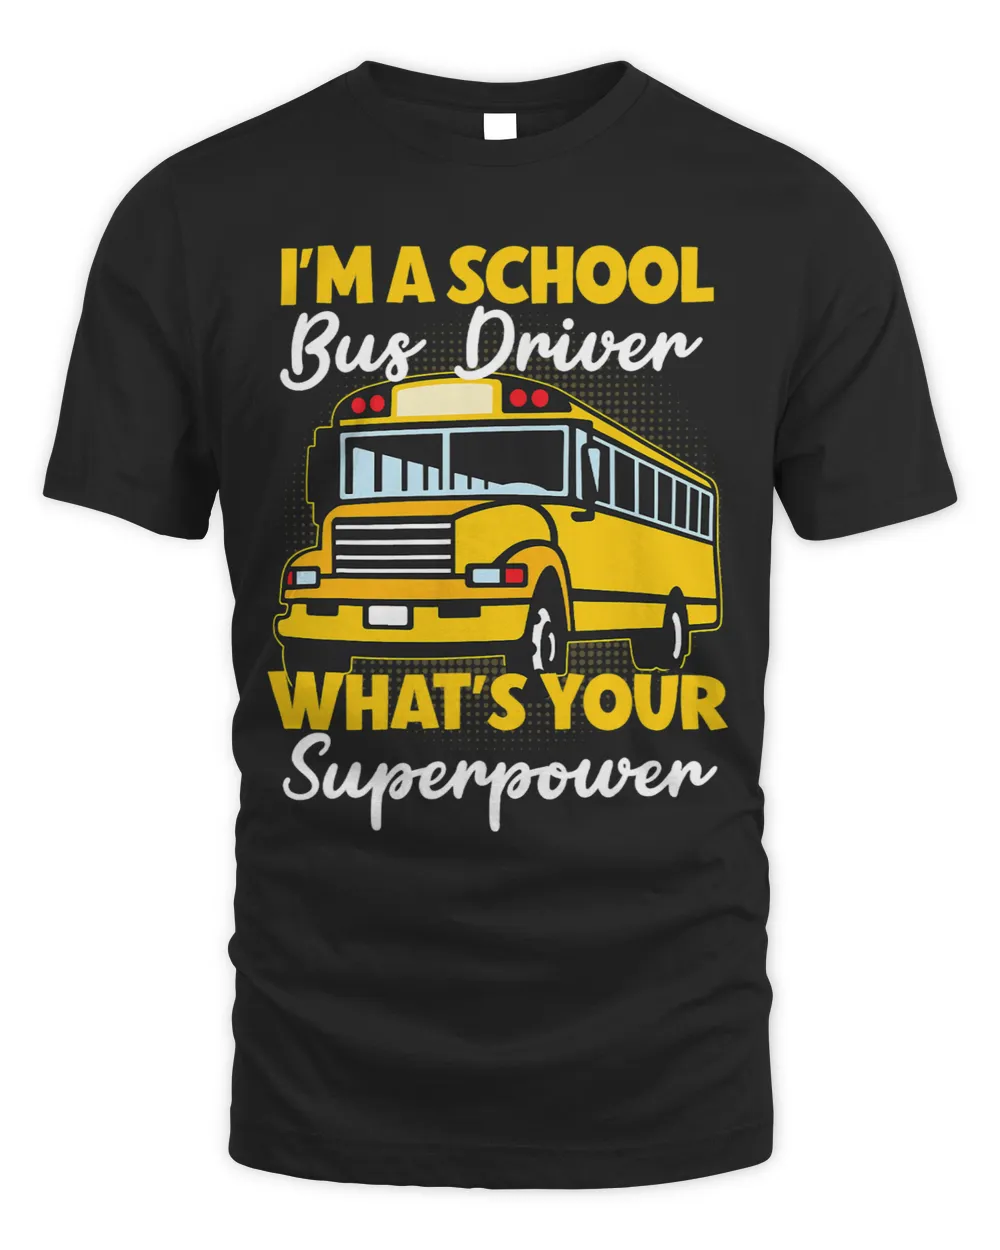 I’m a School Bus Driver What’s Your Super Power Funny bus